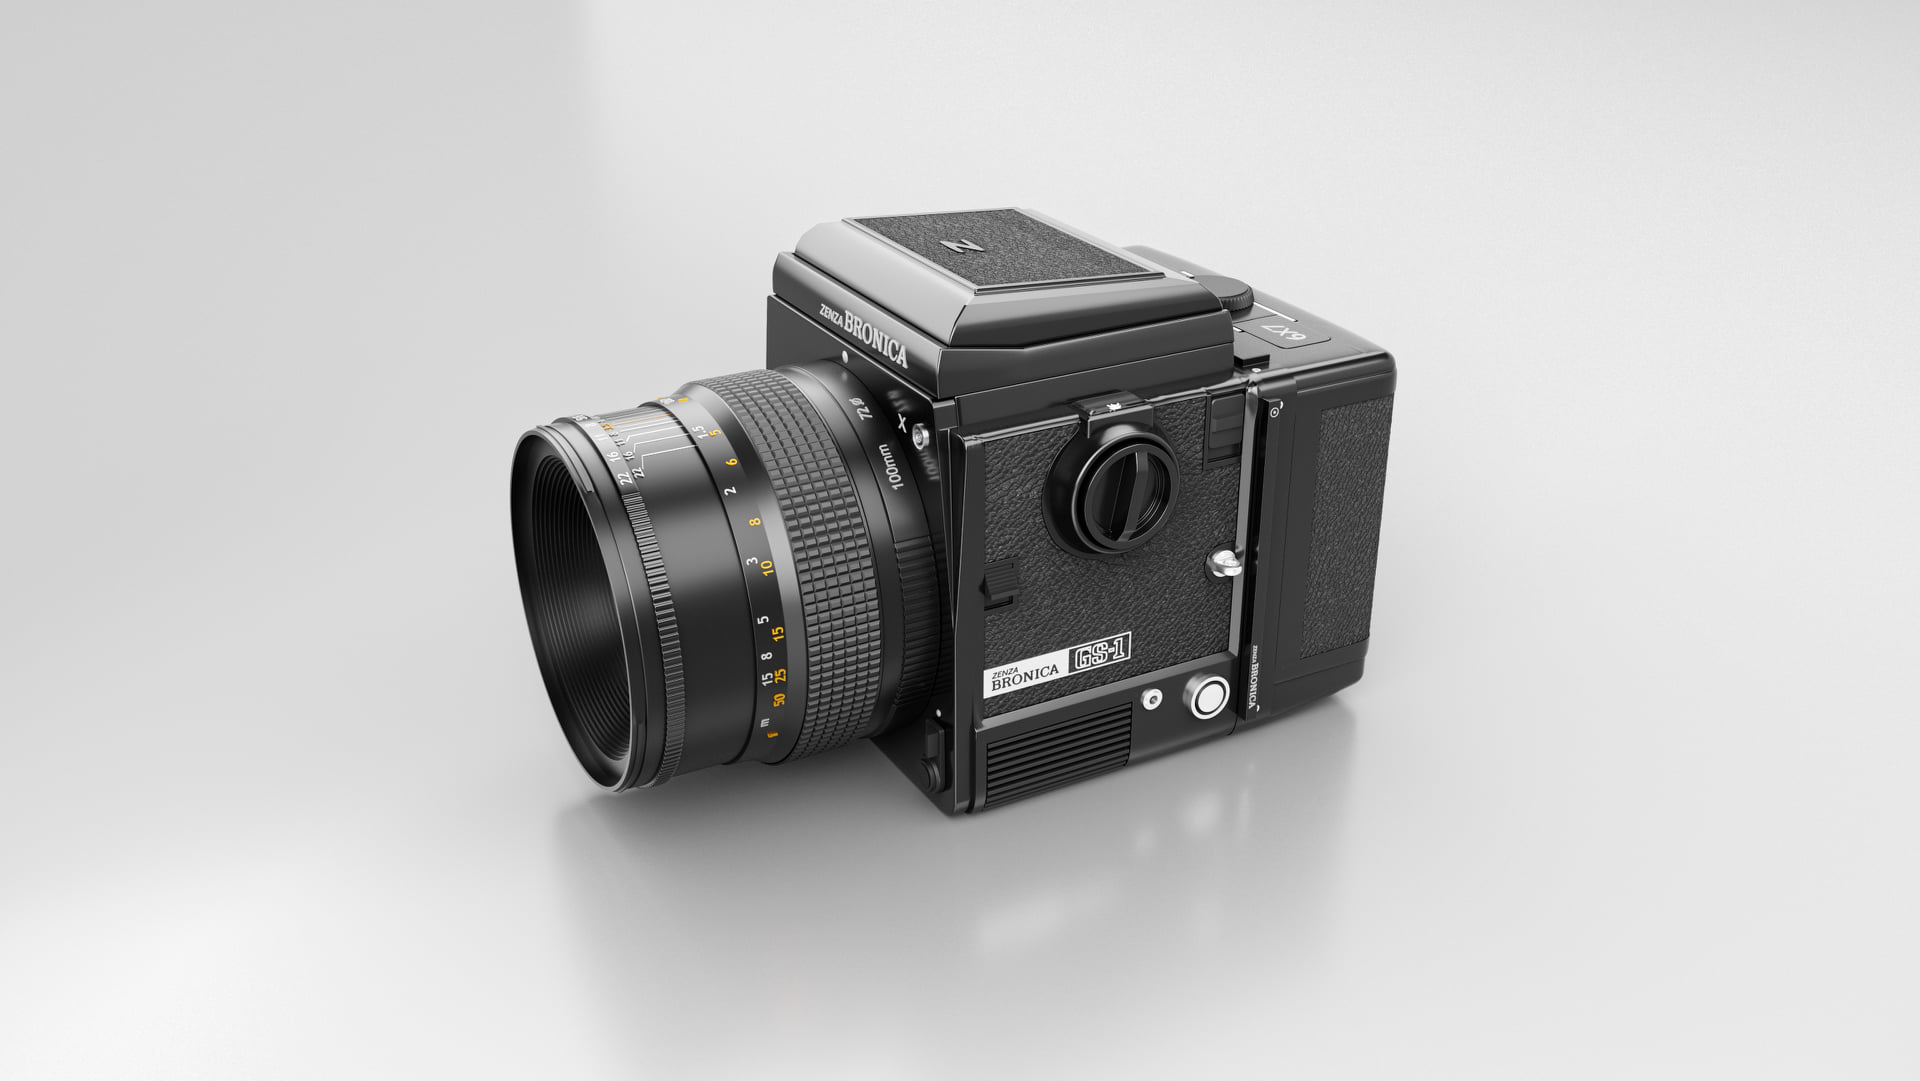 Analog GS-1 camera product render by Wolfgang V Berger using Autodesk Maya  and Maxon Redshift 3D